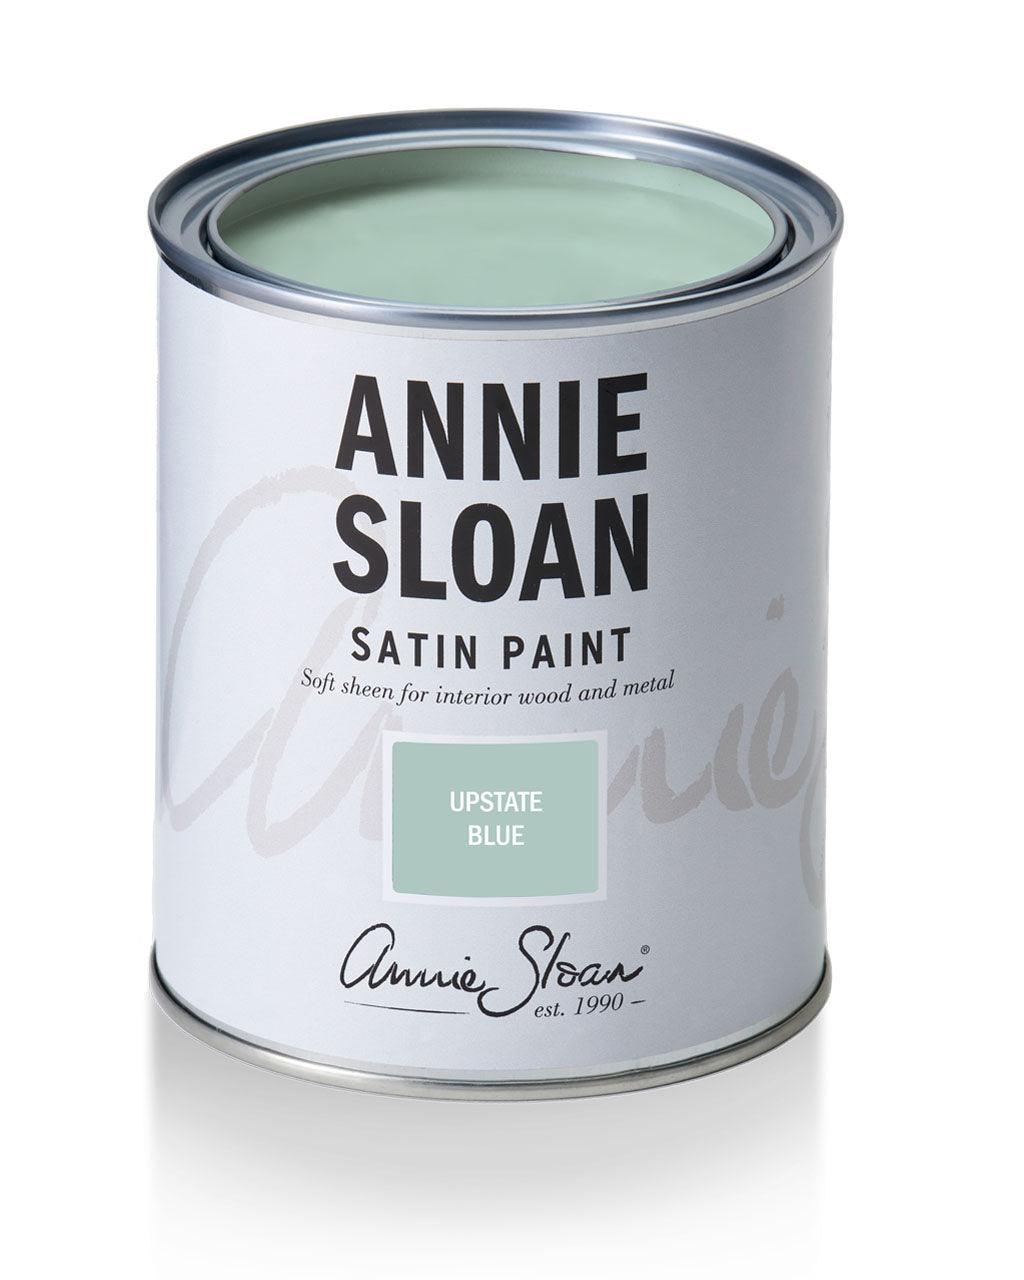 Annie Sloan Satin Paint - The 3 Painted Pugs